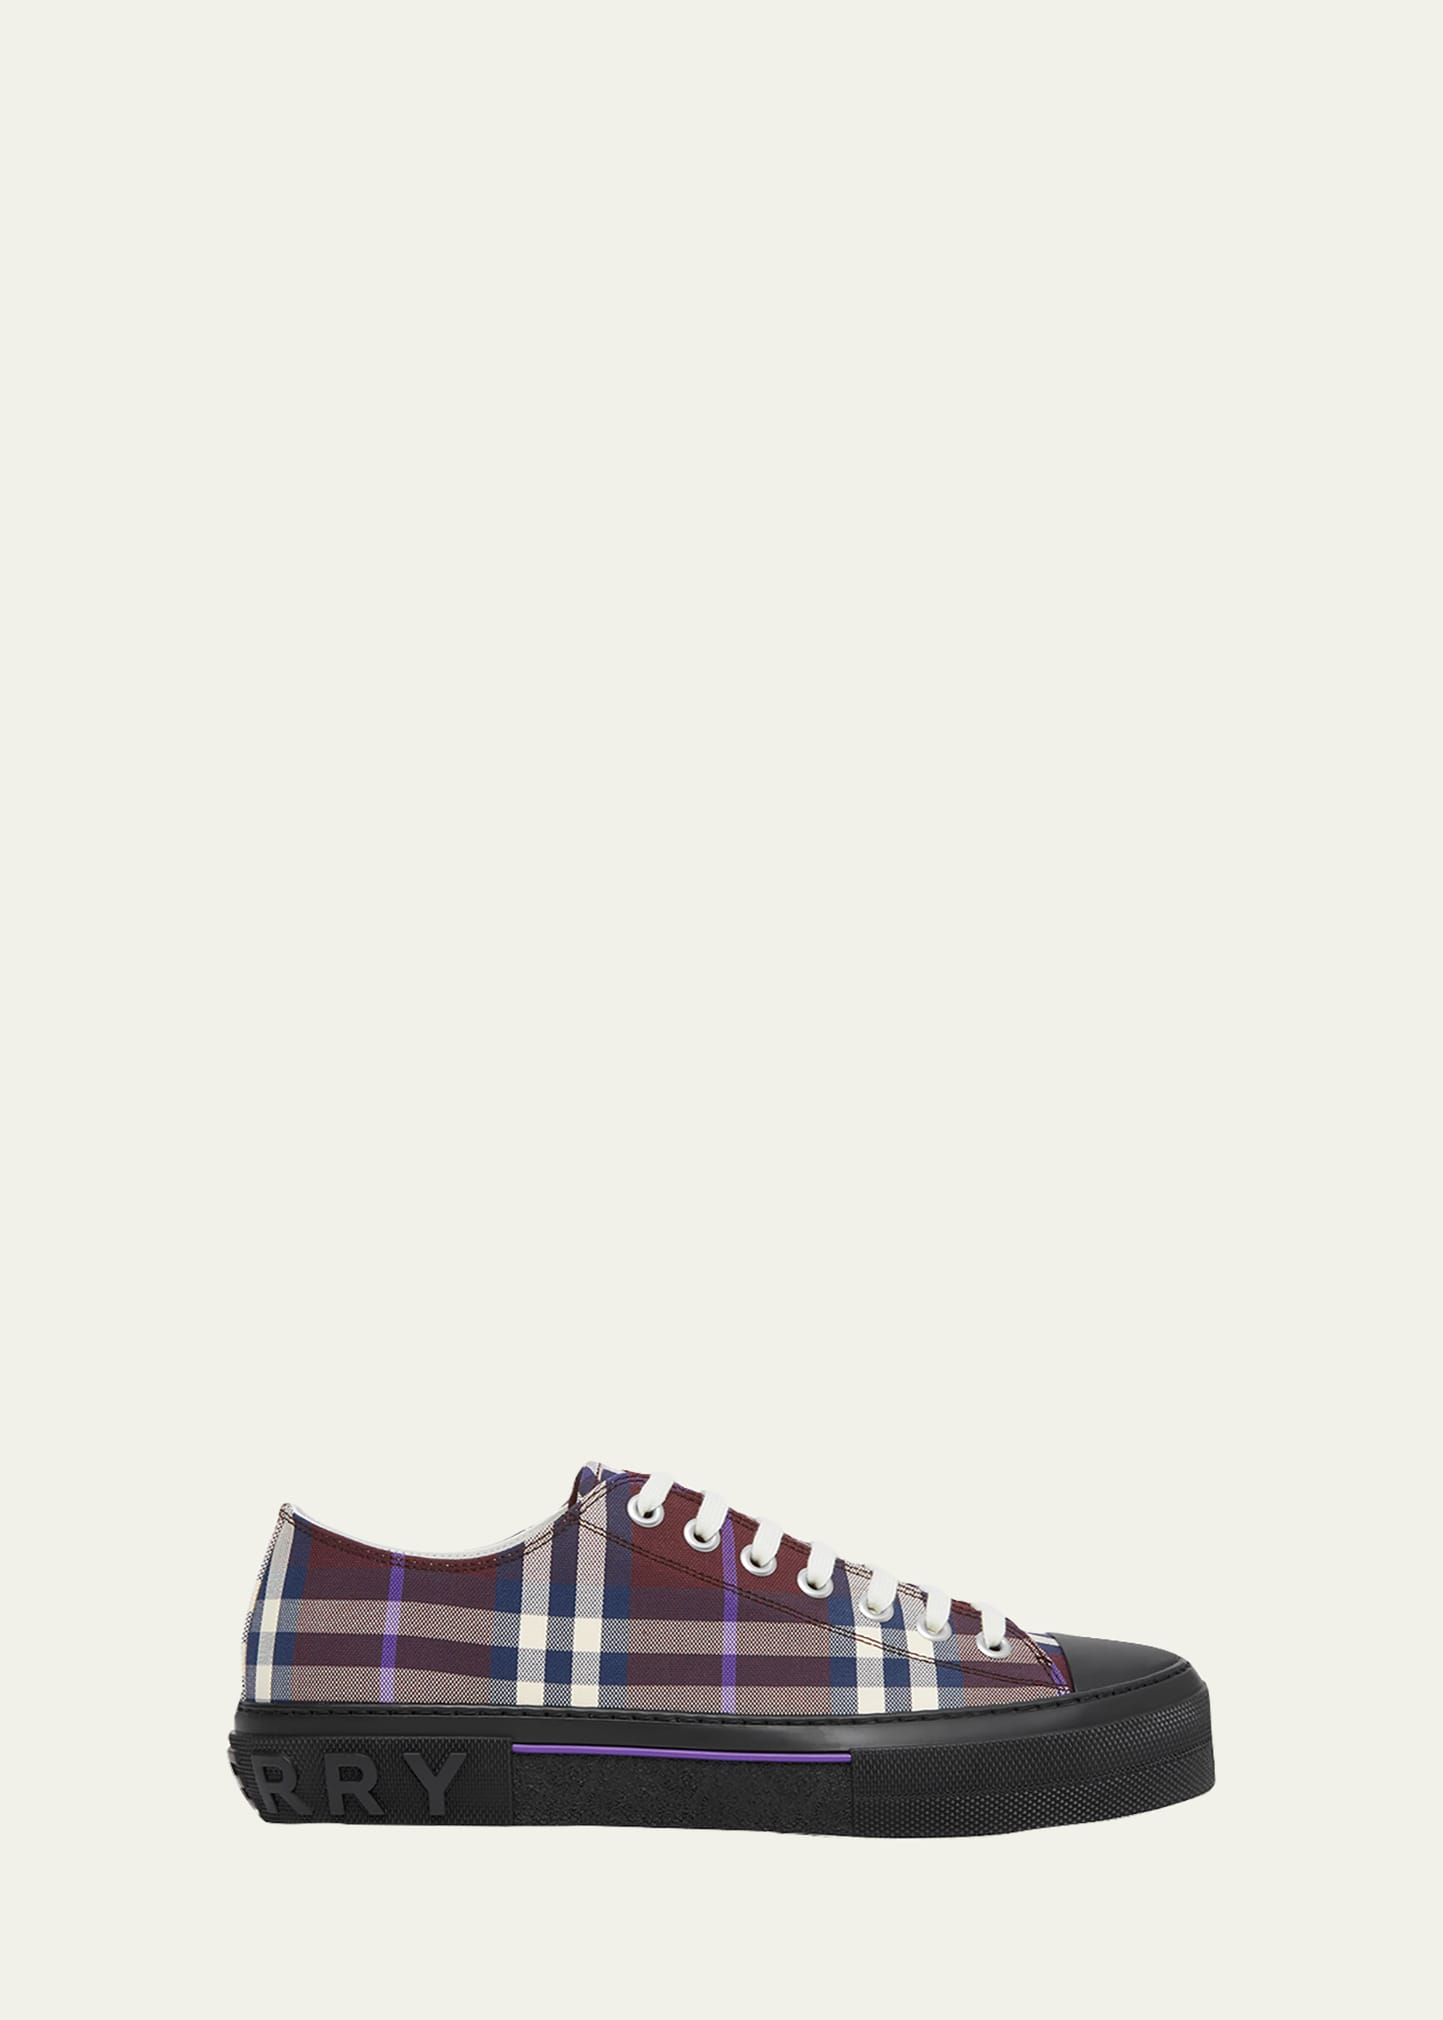 Burberry Men's Low-Top Textile Check Sneakers